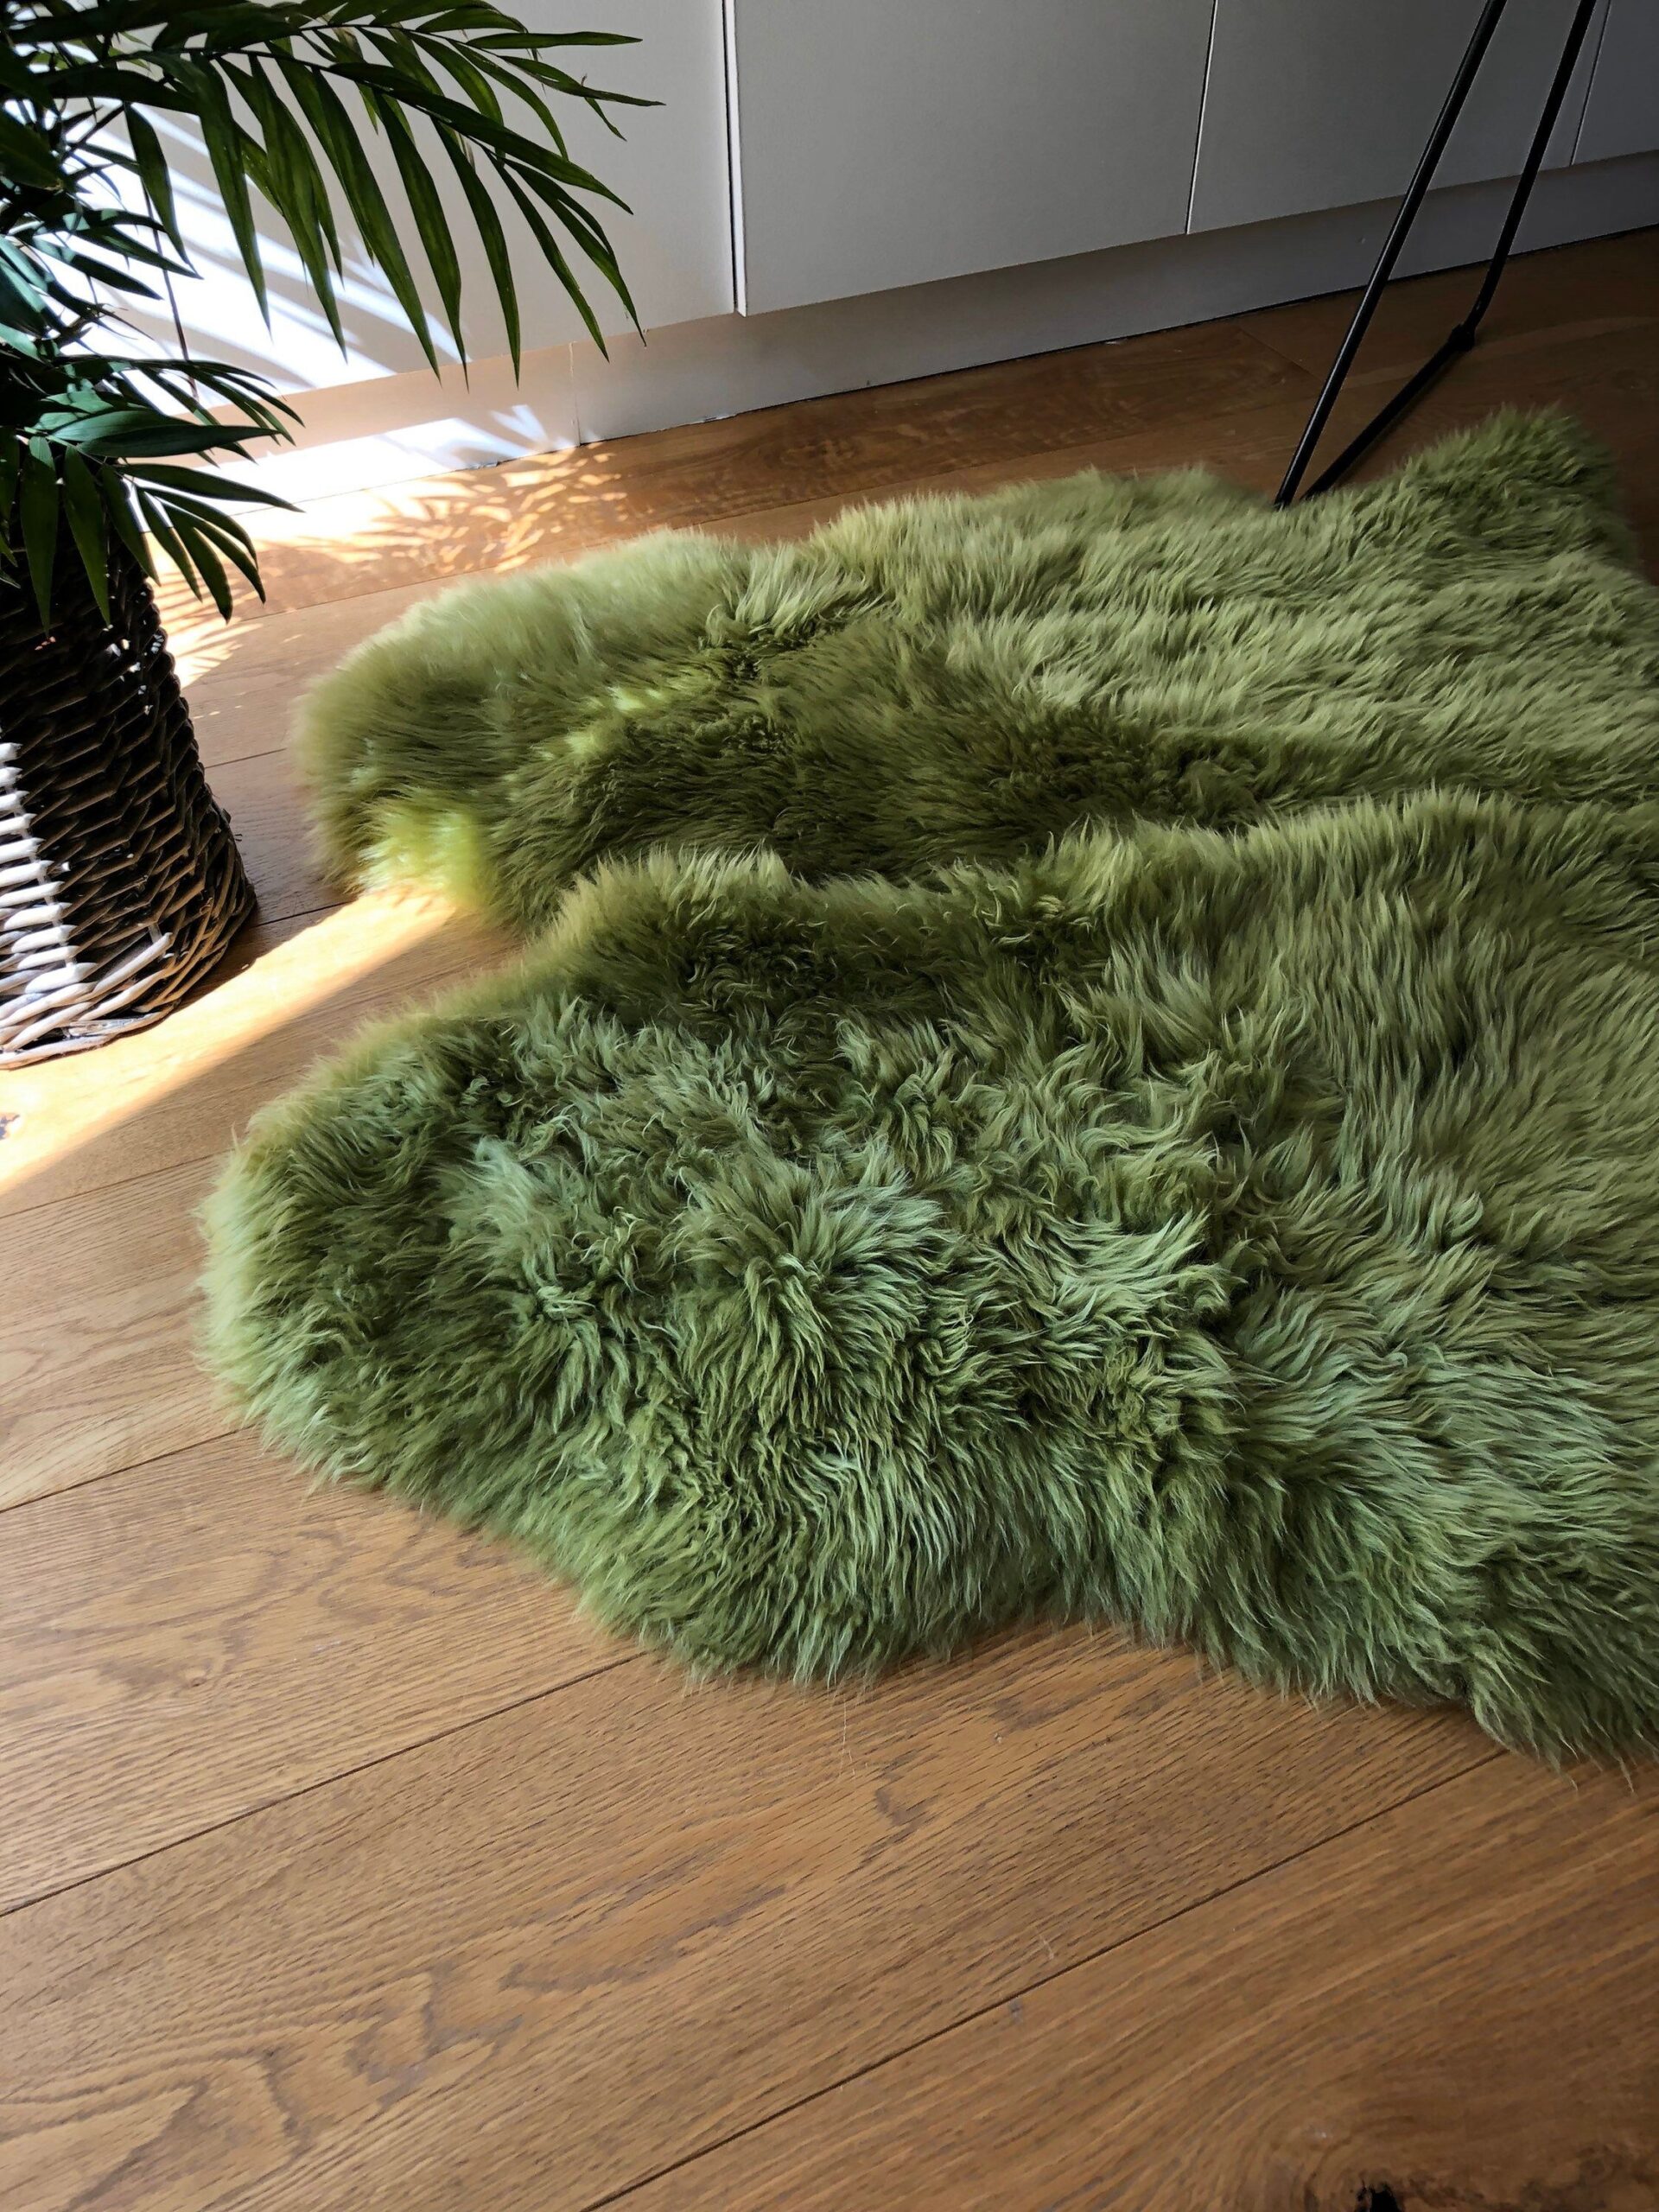 Get a stunning look in your bedroom with
shaggy rugs